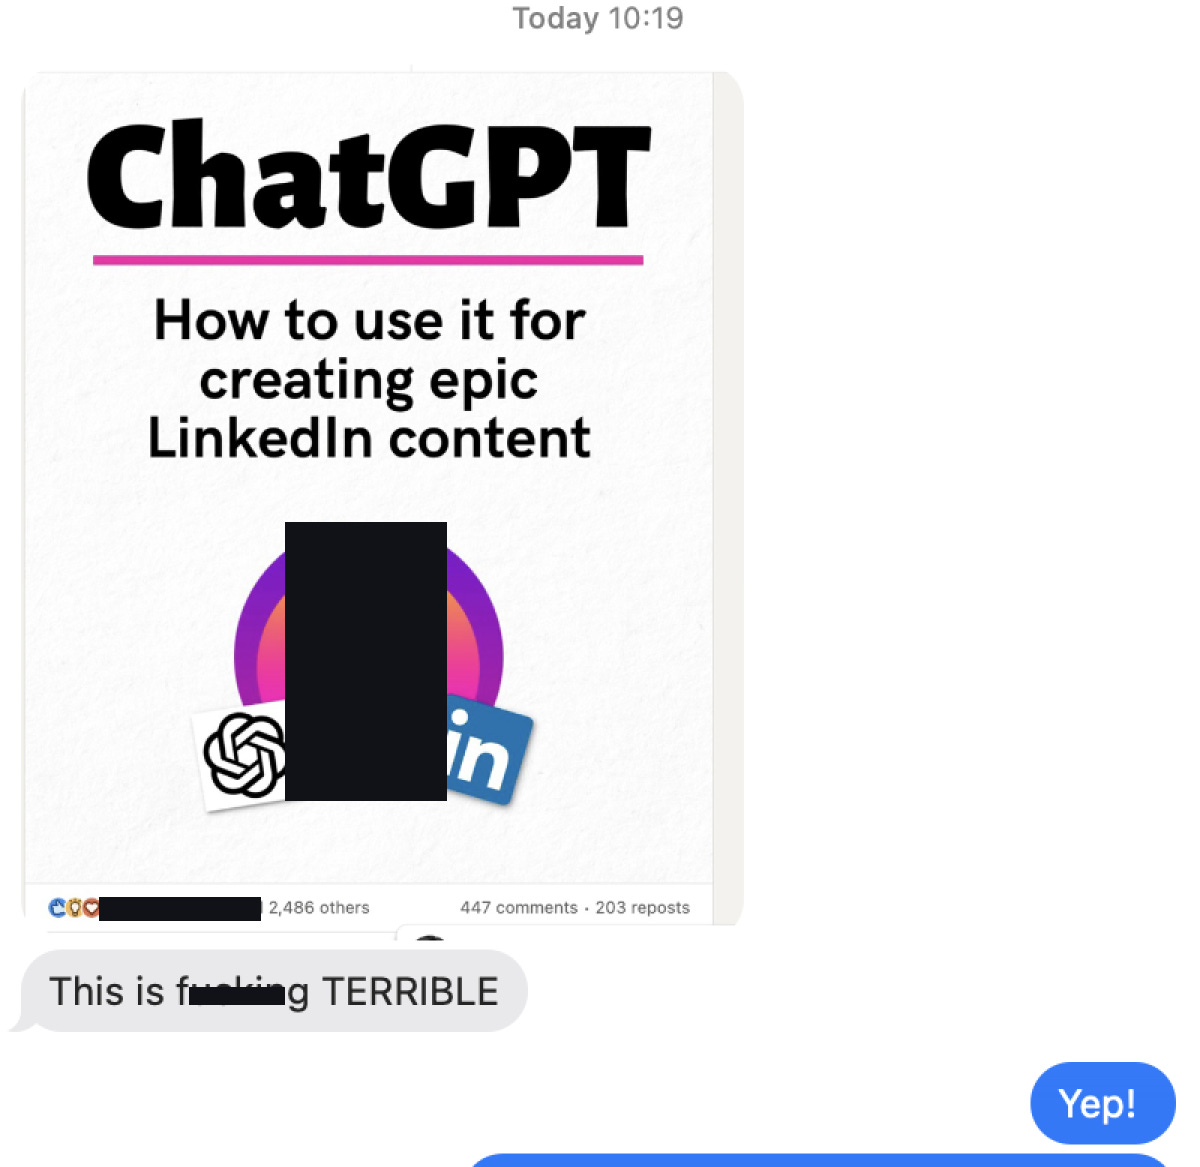 Screenshot from a chat this morning, which lead to this writing.  Screenshot of a LinkedIn AD for ChatGPT. How to use if for creating epic Linked in content. In the message below the first message reads. This is fucking TERRIBLE. Reply message. YEP!